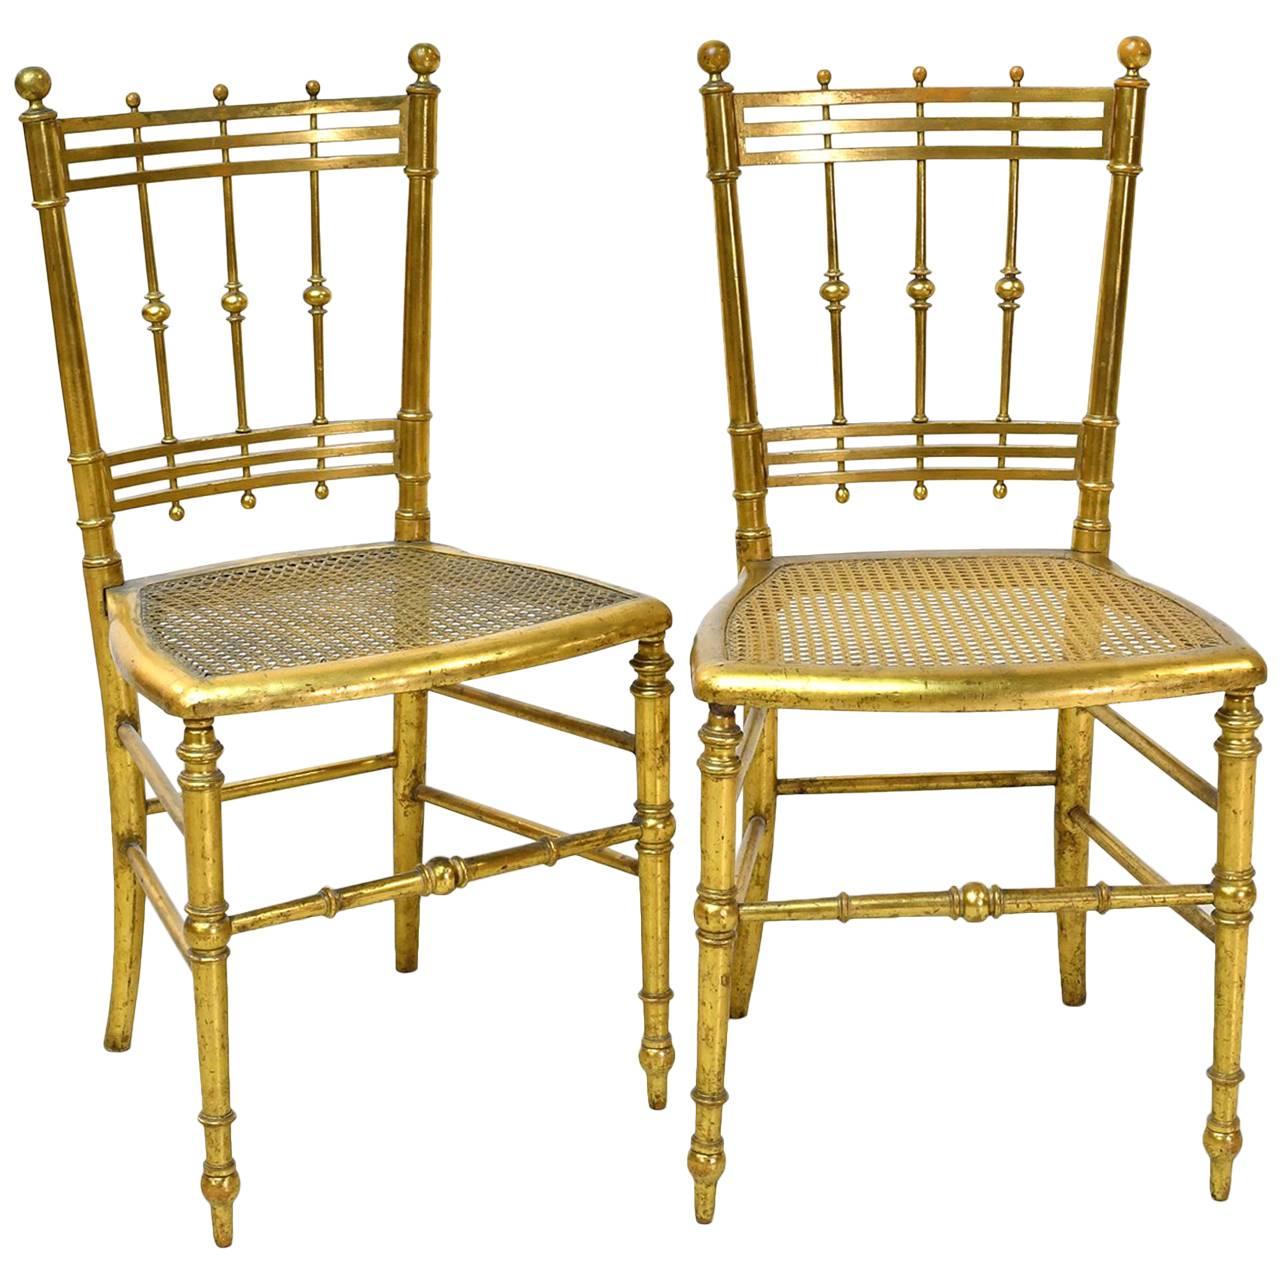 Pair of Early 20th Century French Belle Époque Salon/ Dining Chairs in Giltwood For Sale